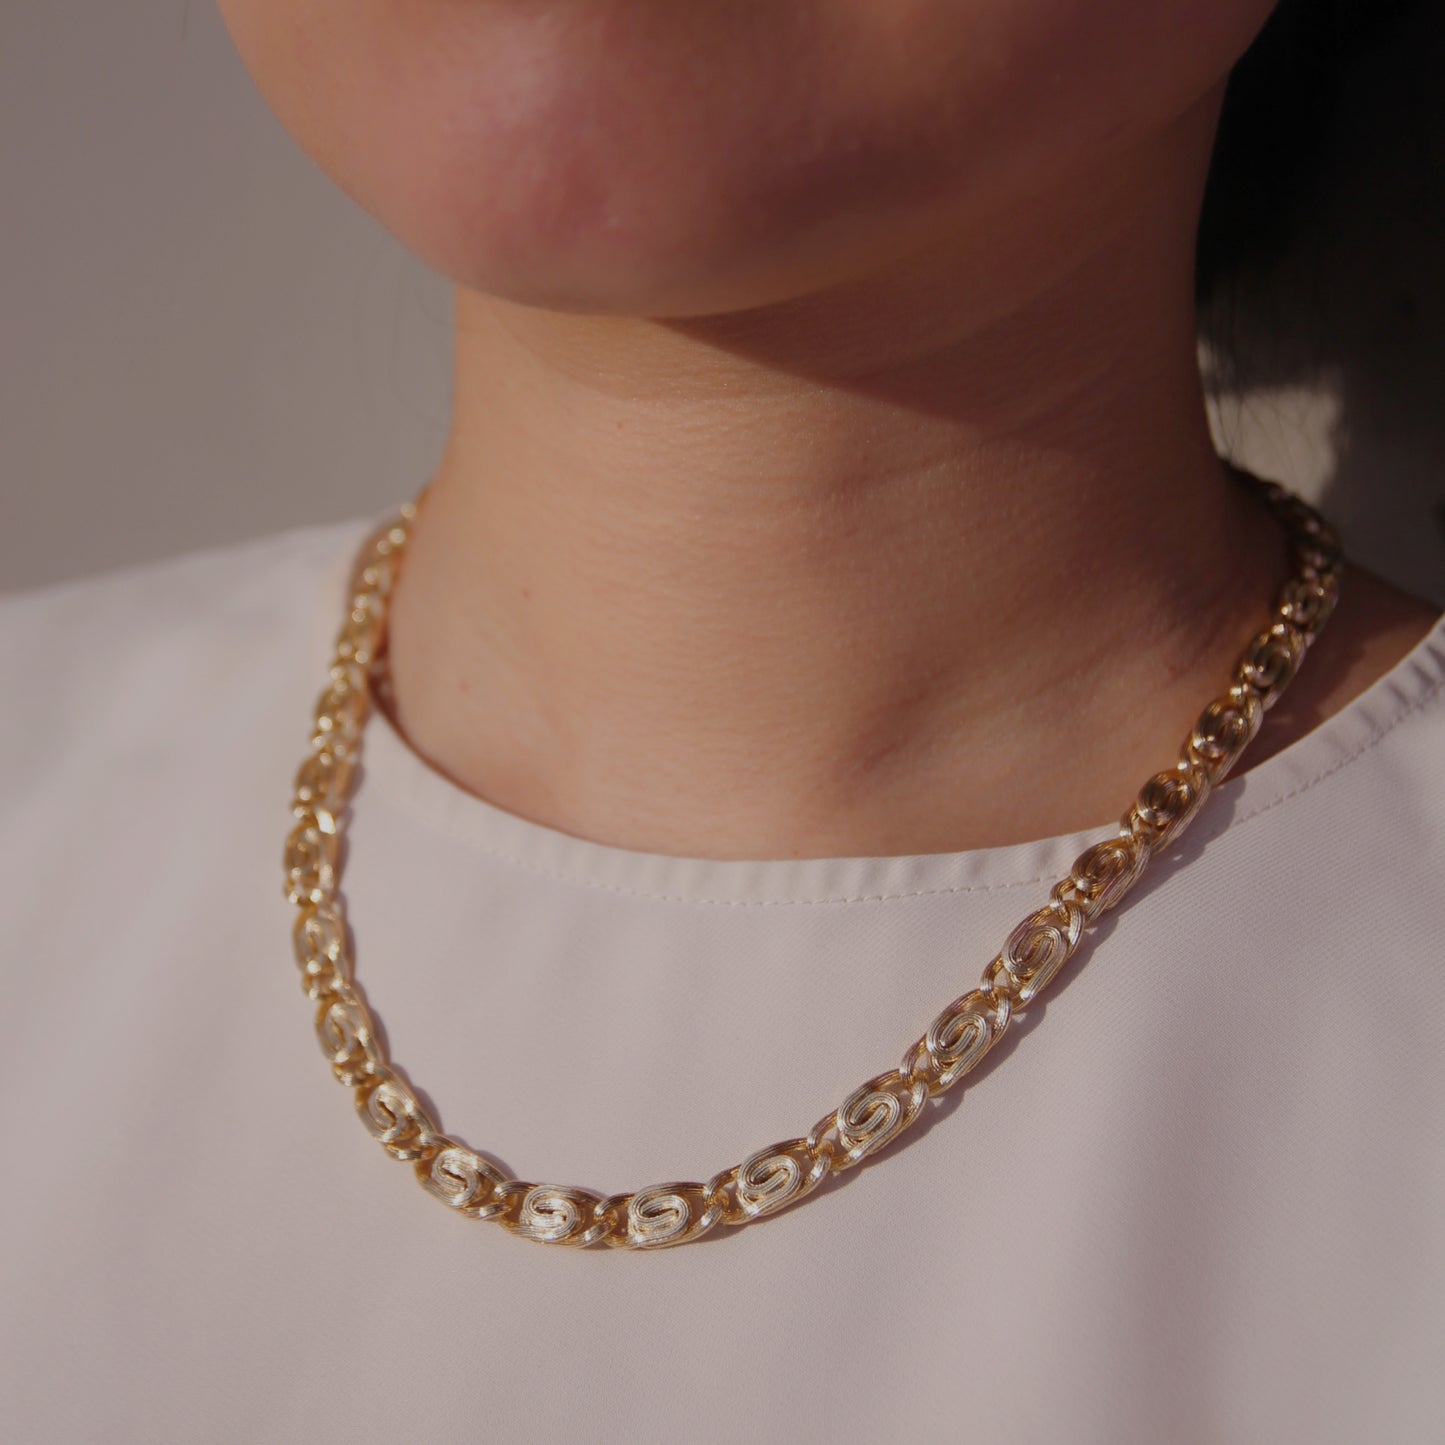 Gold Petal Link Chain Necklace - 18in